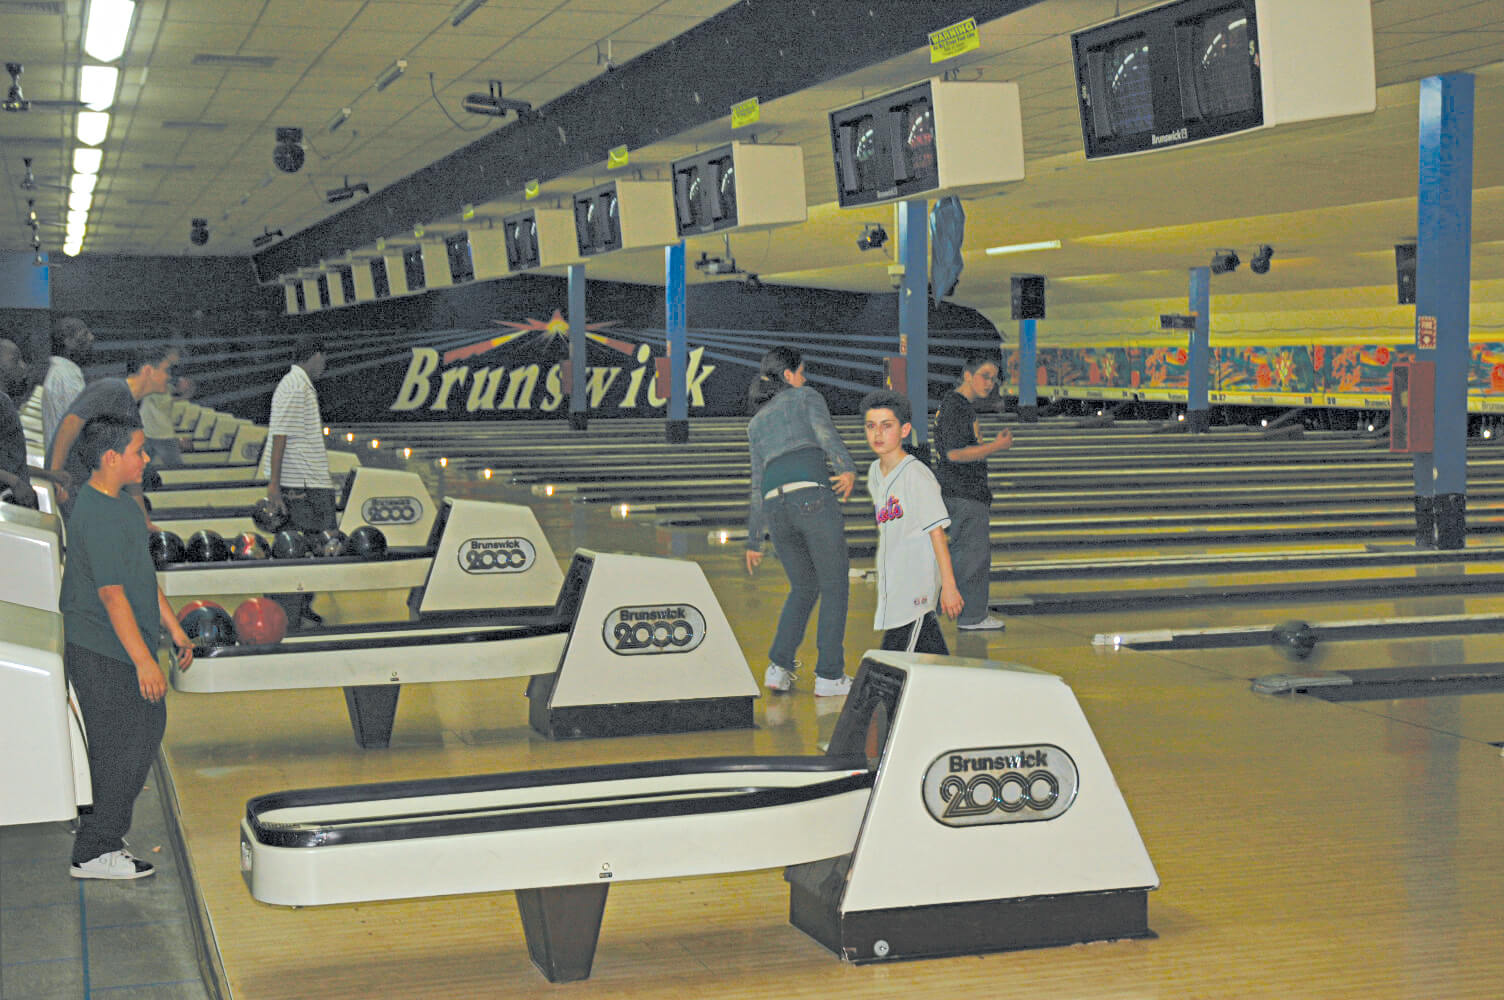 Bowlers at the now-defunct Woodhaven Lanes, which closed in May 2008.